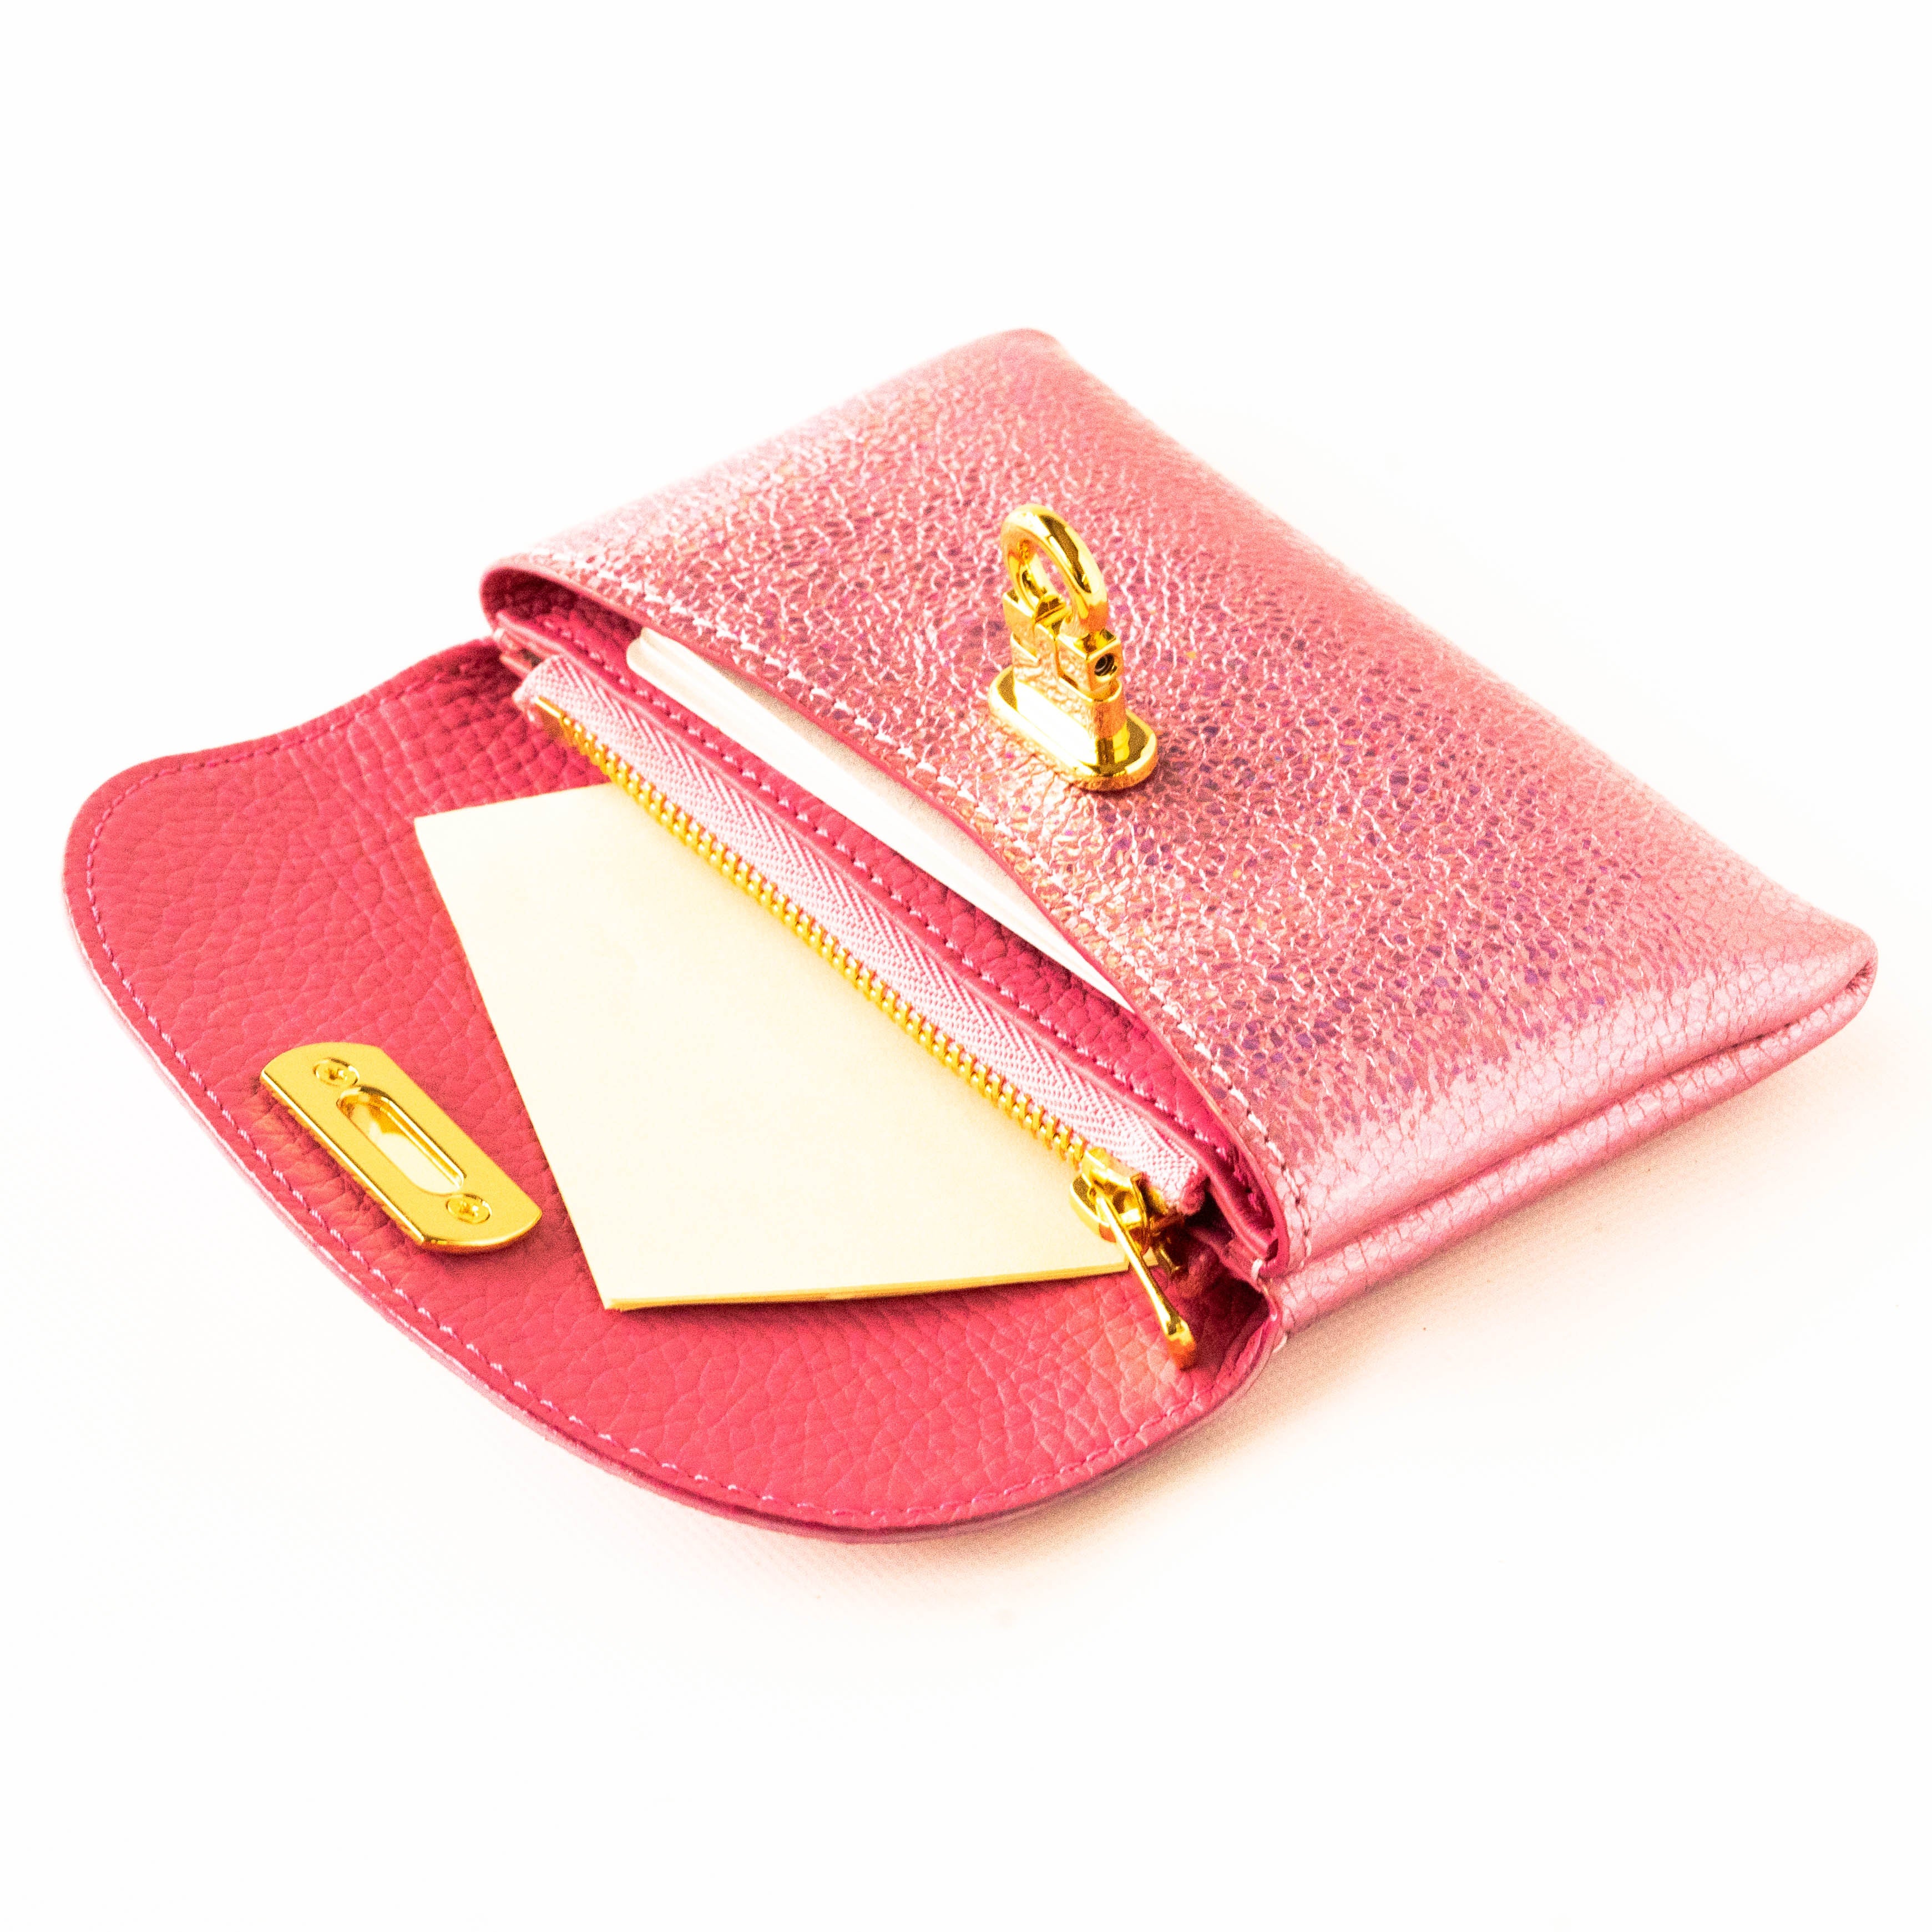 Leather flap middle wallet / Prism leather